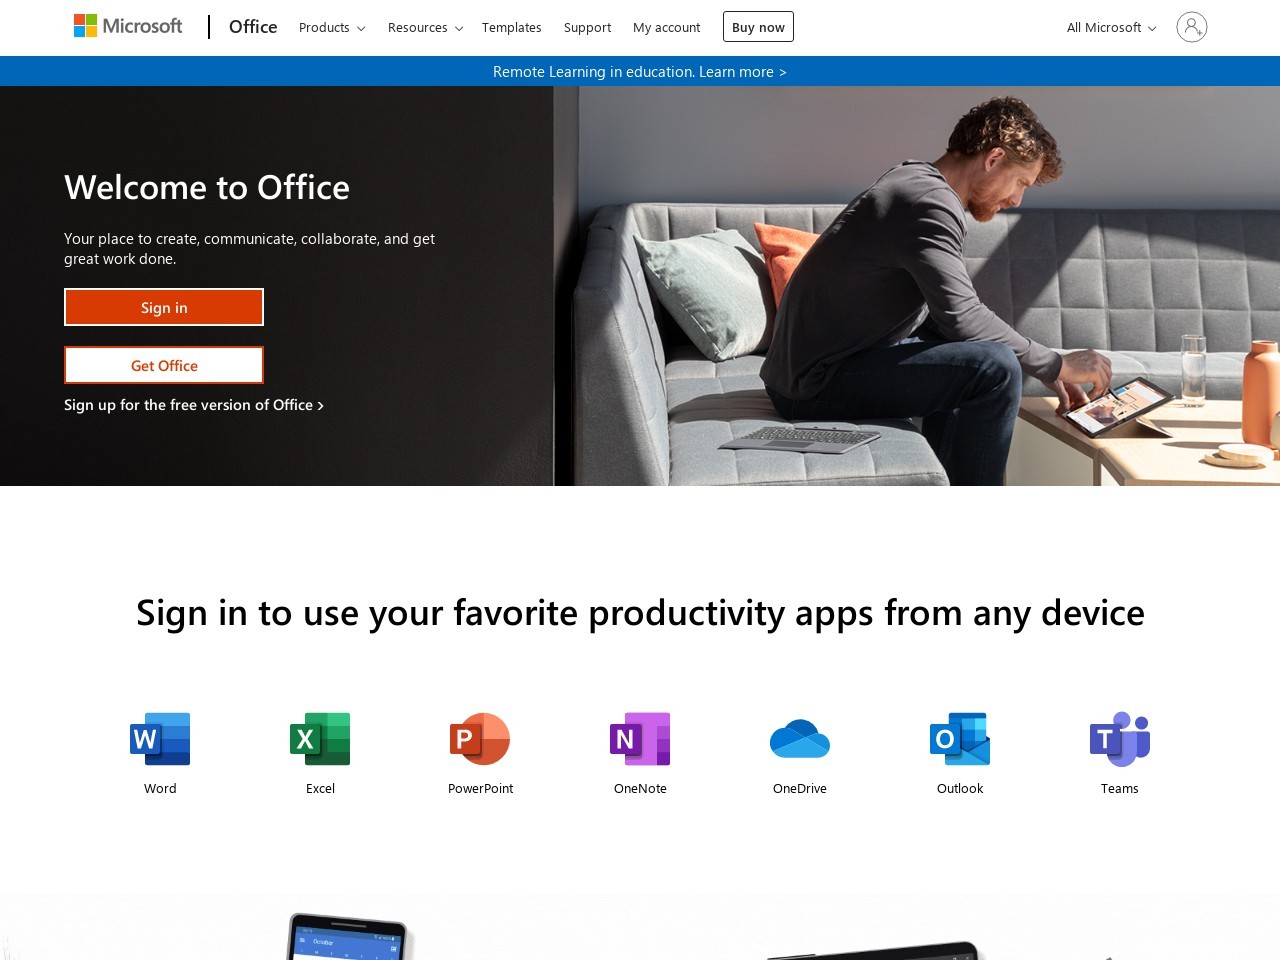 Office for Android™ tablet - Office 365 Login | Microsoft Office